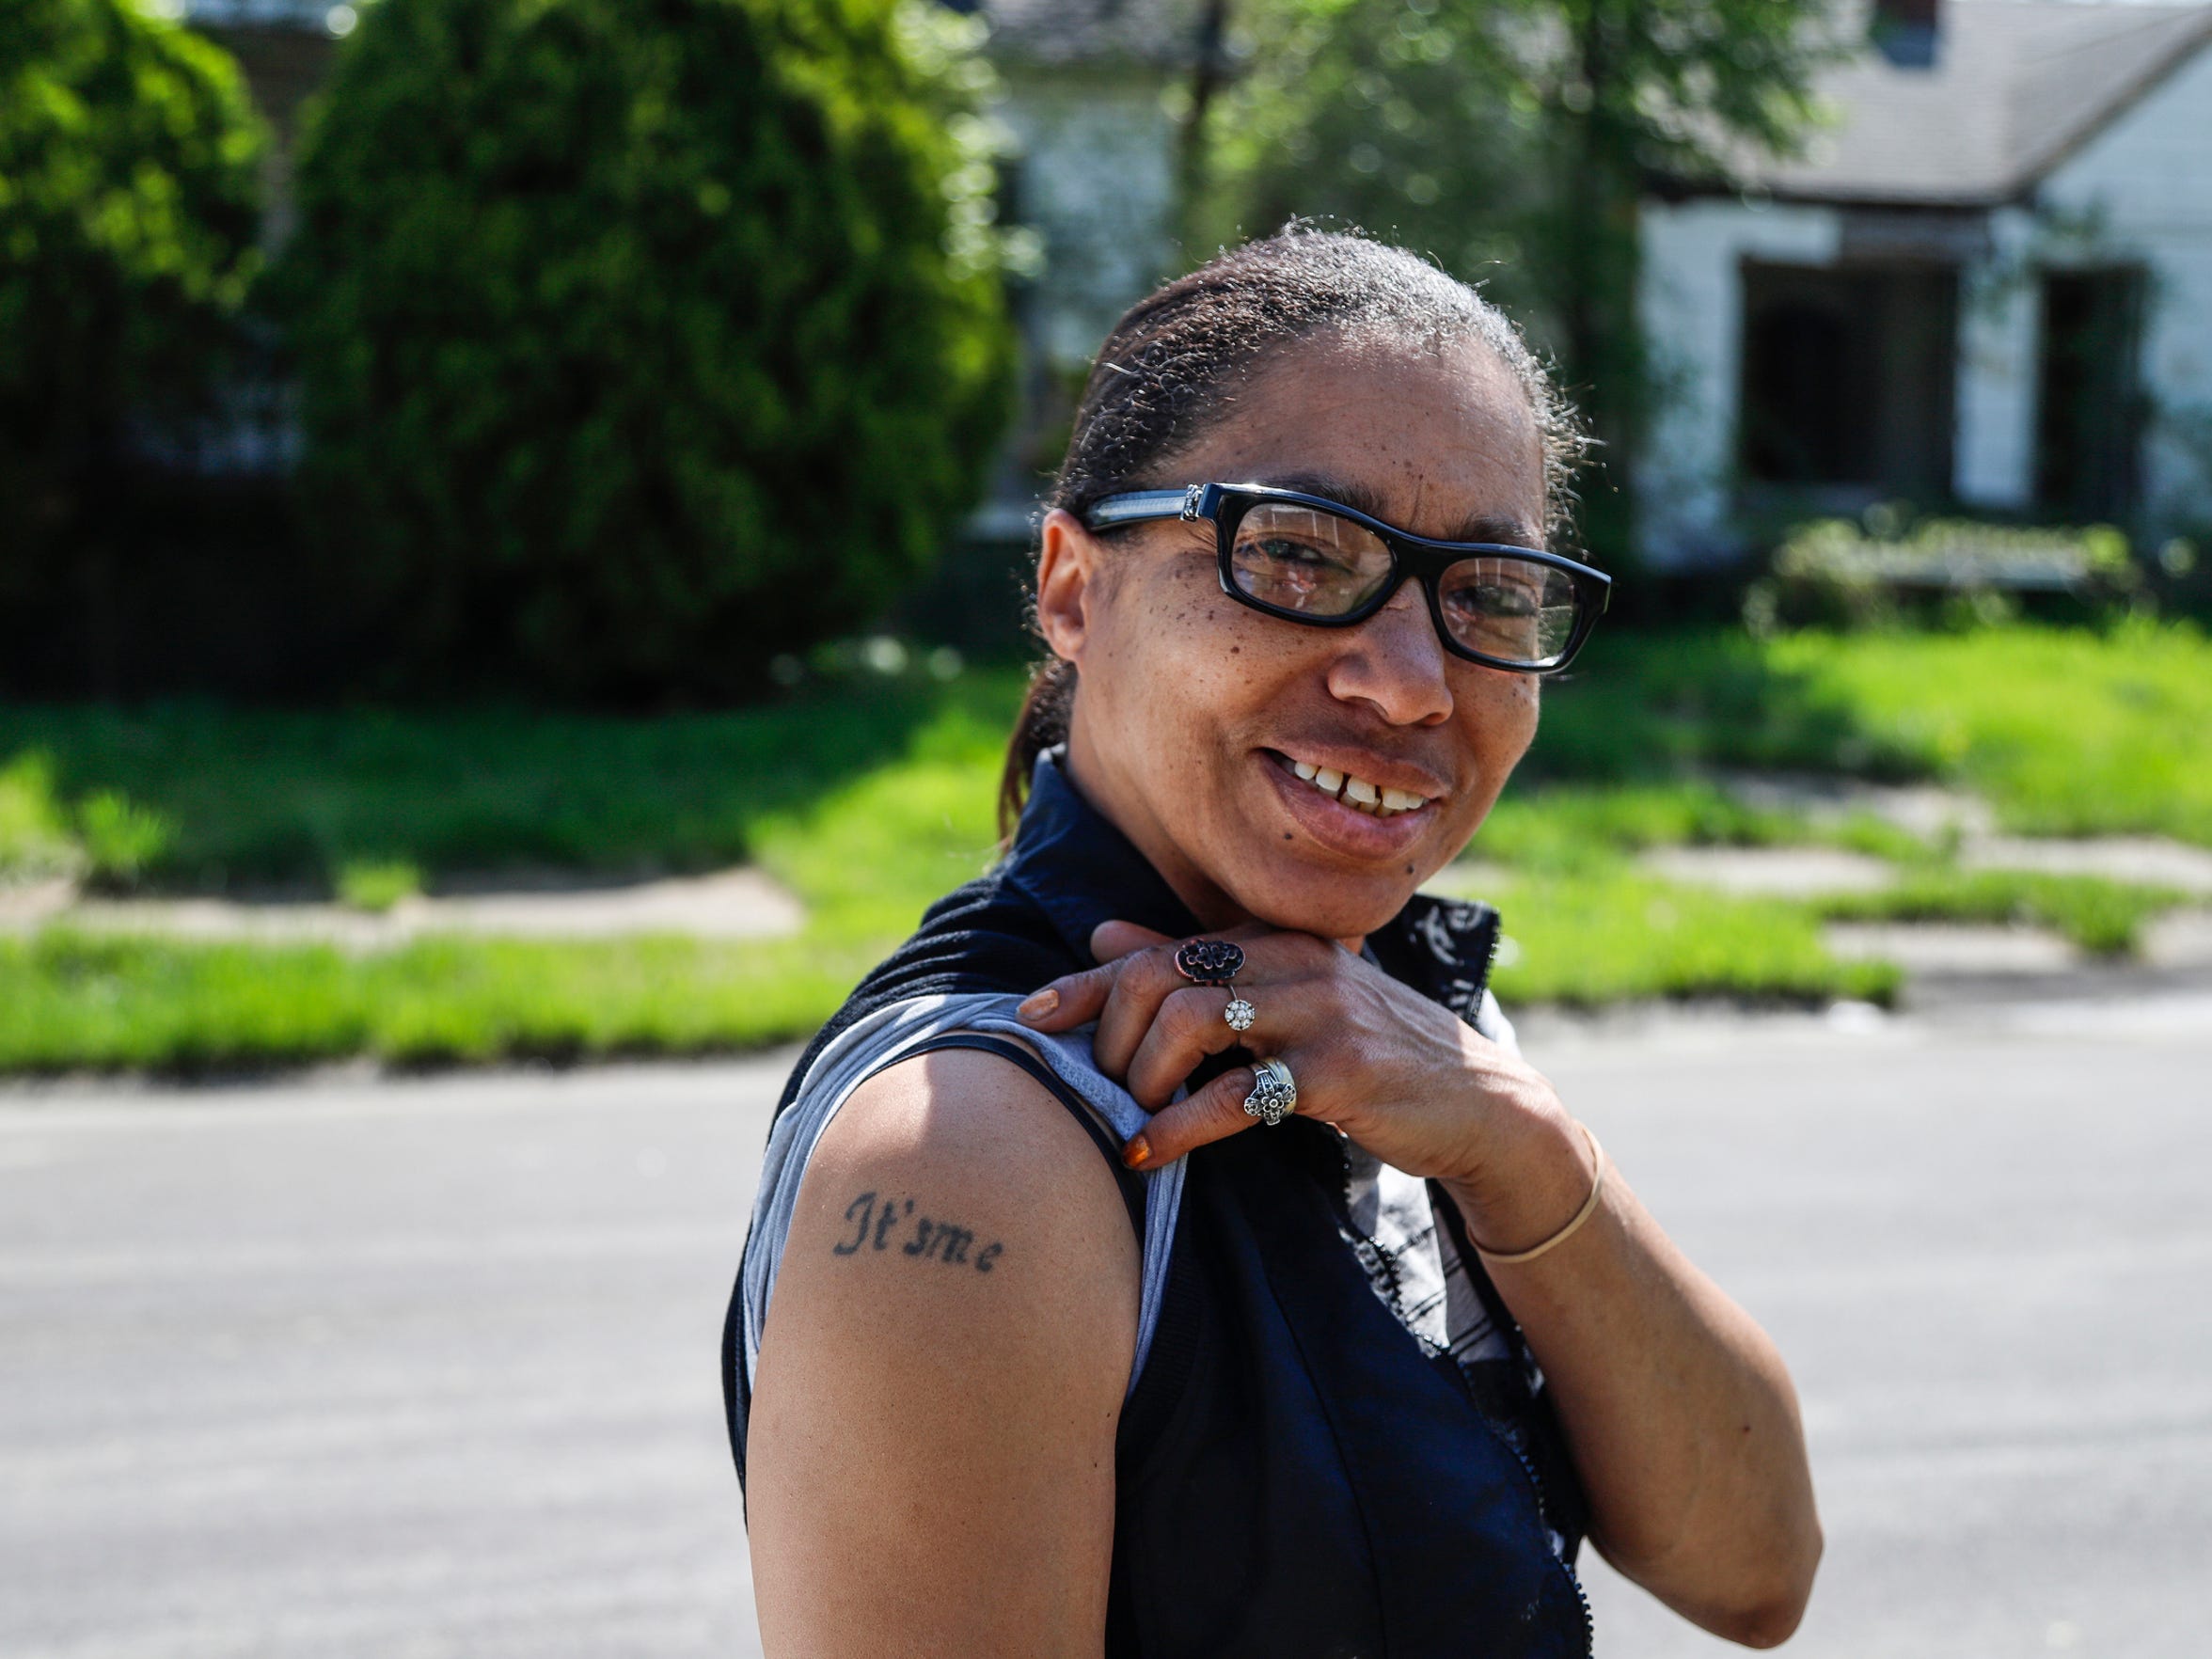 Alpine Street resident Aquin Hill in May shows off a tattoo of her nickname on her right arm. (Photo taken May 17, 2018)